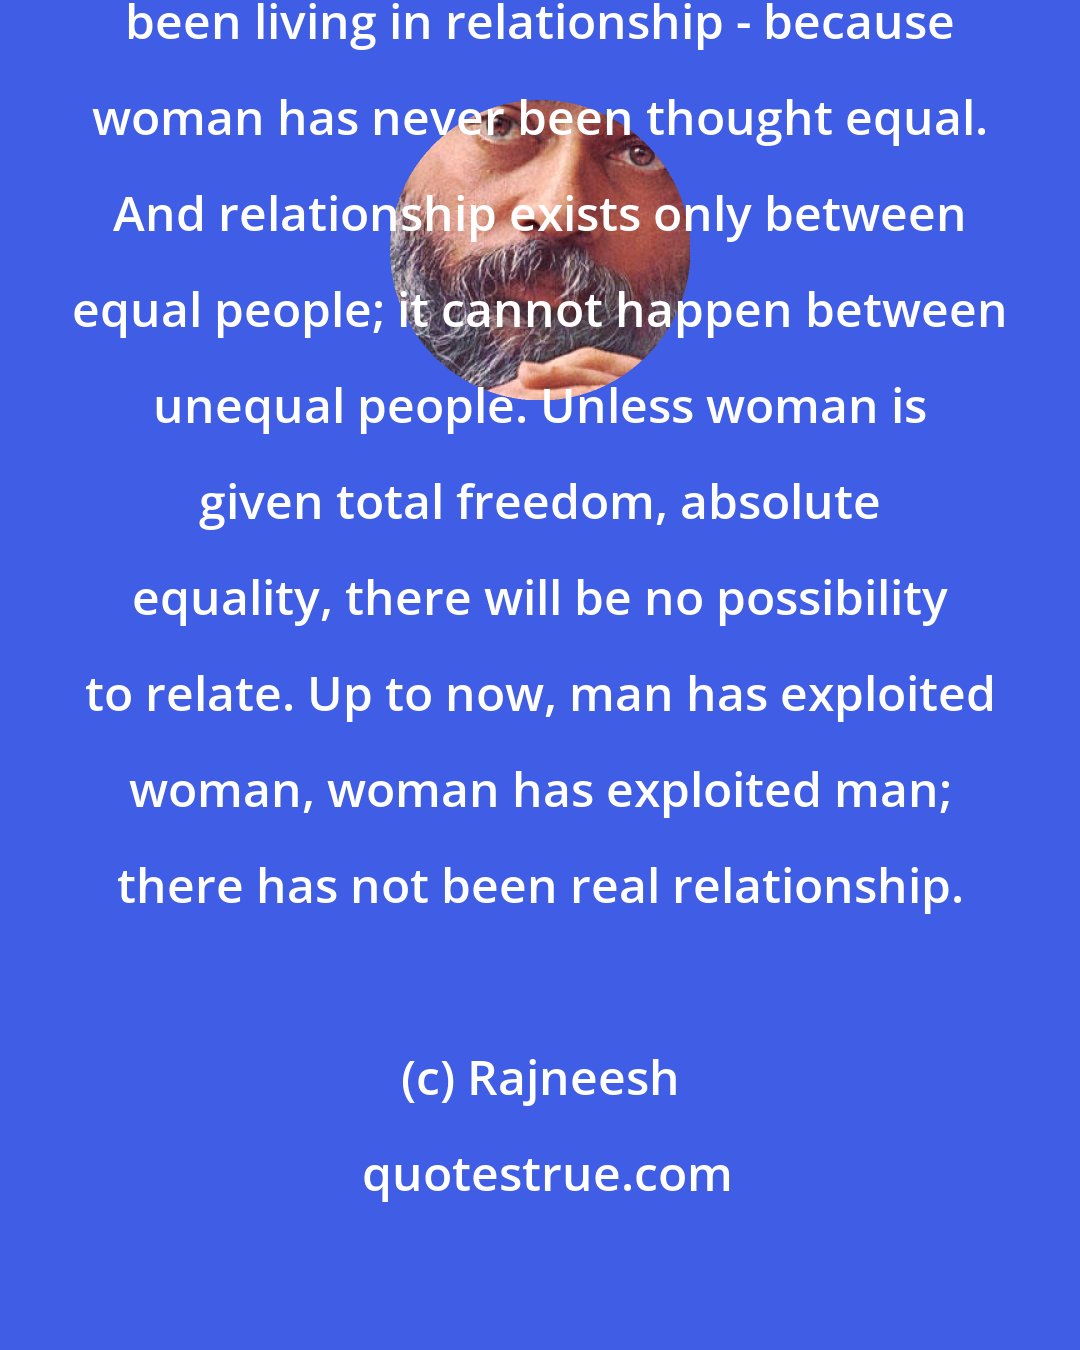 Rajneesh: Up to now, men and women have not been living in relationship - because woman has never been thought equal. And relationship exists only between equal people; it cannot happen between unequal people. Unless woman is given total freedom, absolute equality, there will be no possibility to relate. Up to now, man has exploited woman, woman has exploited man; there has not been real relationship.